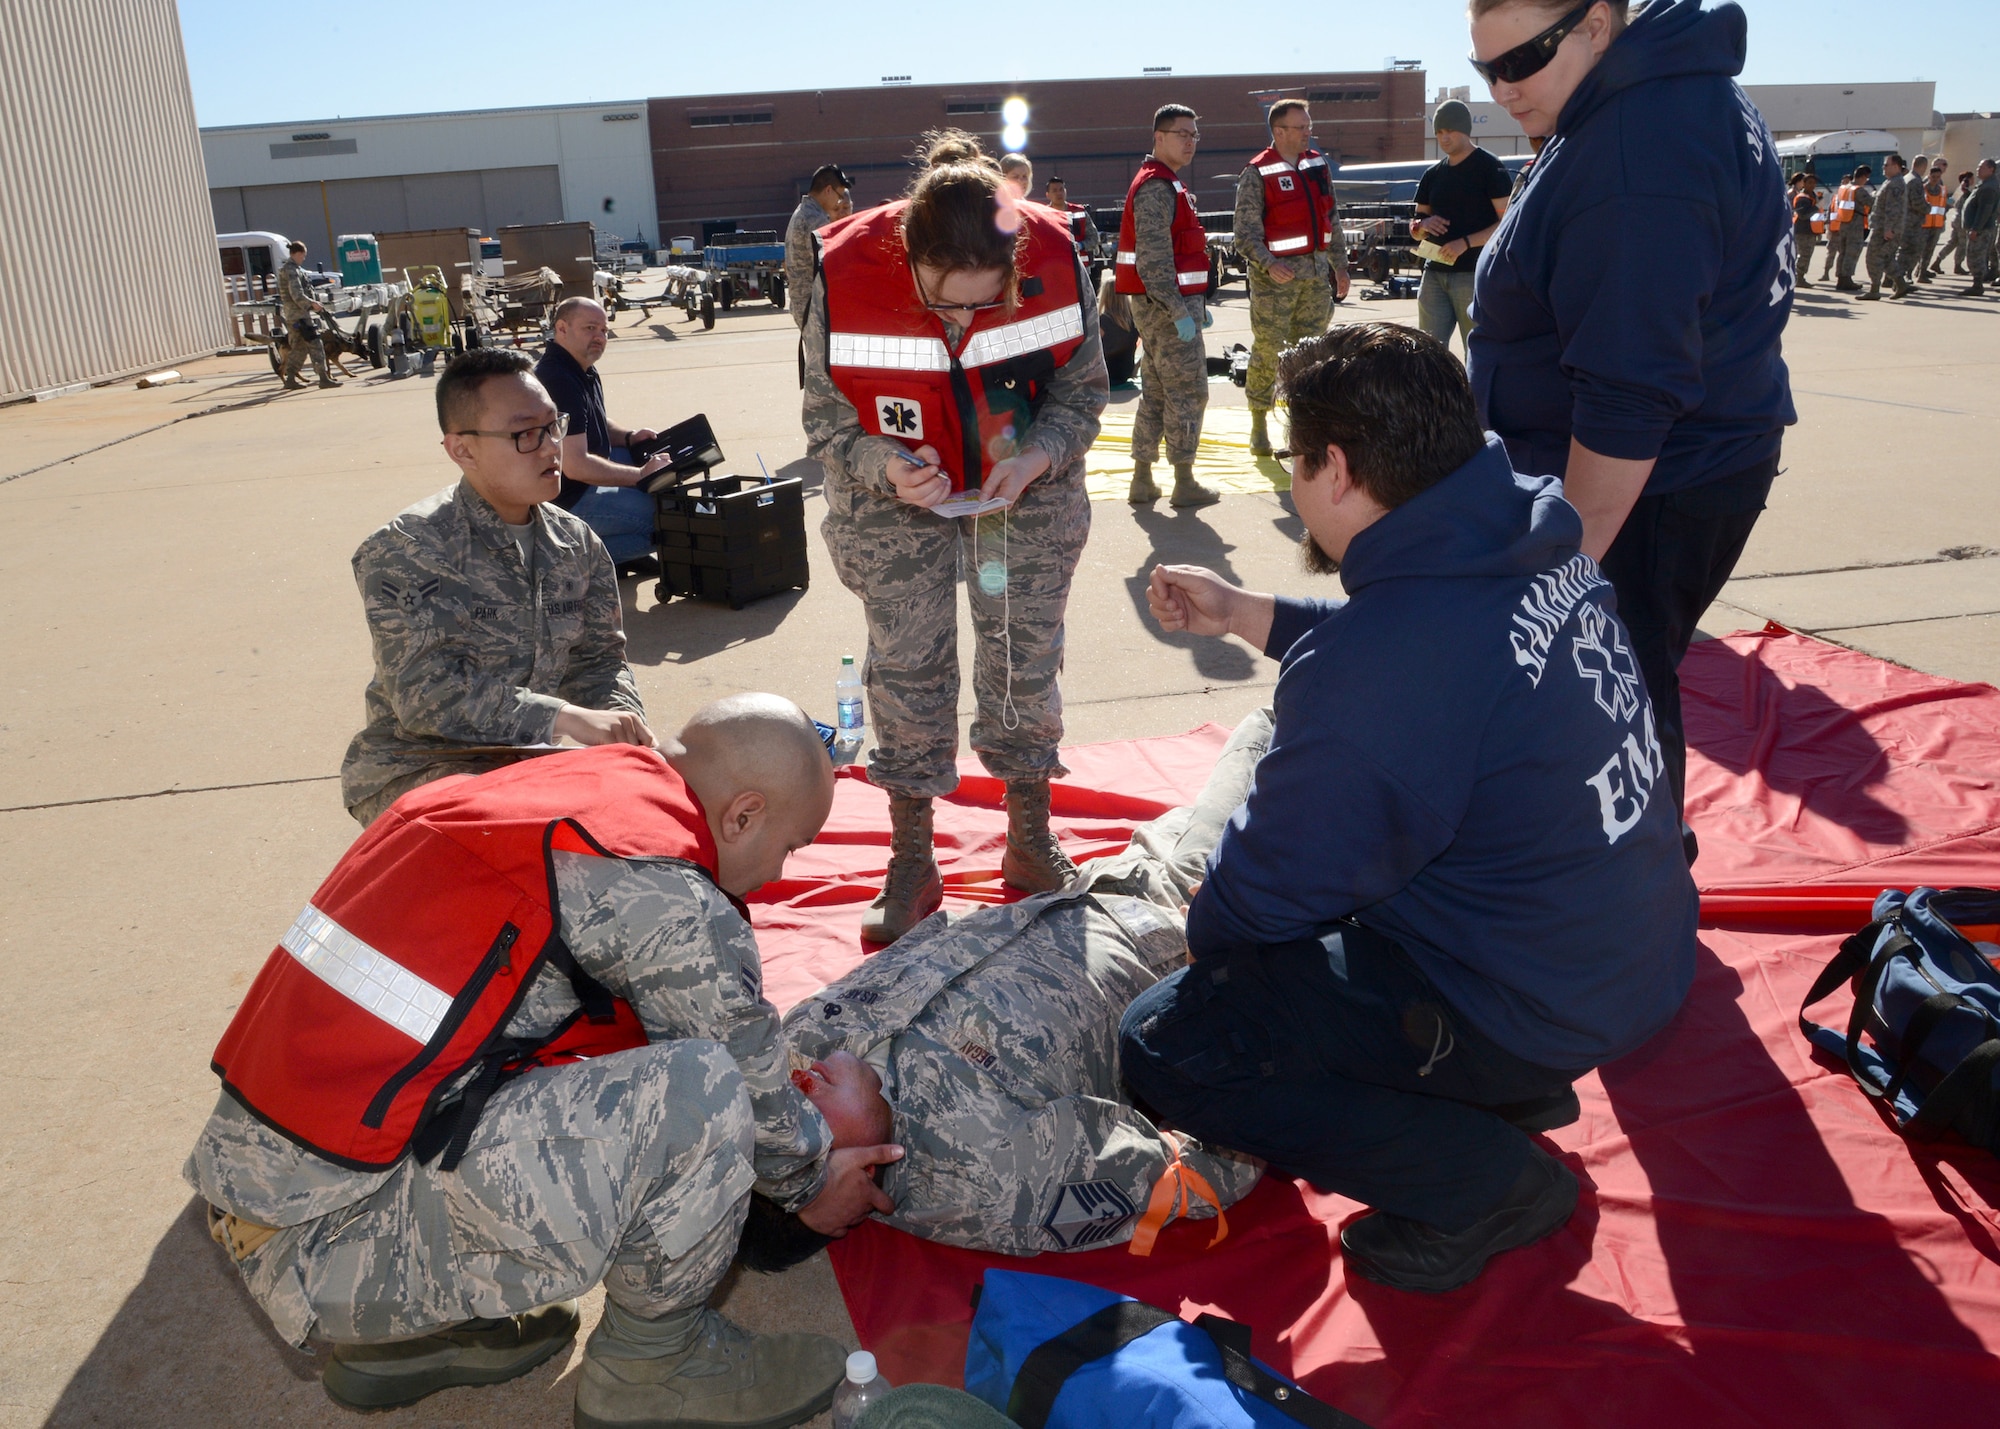 Members of the 72nd Medical Group worked side-by-side with Samaritan EMS during the emergency response exercise April 6 to help Master Sgt. Bob Begay, with the 513th Maintenance Squadron. Moulage victims were sorted into four categories (minor, delayed, immediate and morgue) based on injury severity in the triage area. Medics gave immediate care to the victims and filled out individual triage tags, which shows such information as personal information about the victim, types of injuries, vital signs and mental state. The triage tags help inform EMS or other medical professionals about a victim’s state when they enter their care. (Air Force photo by Kelly White)